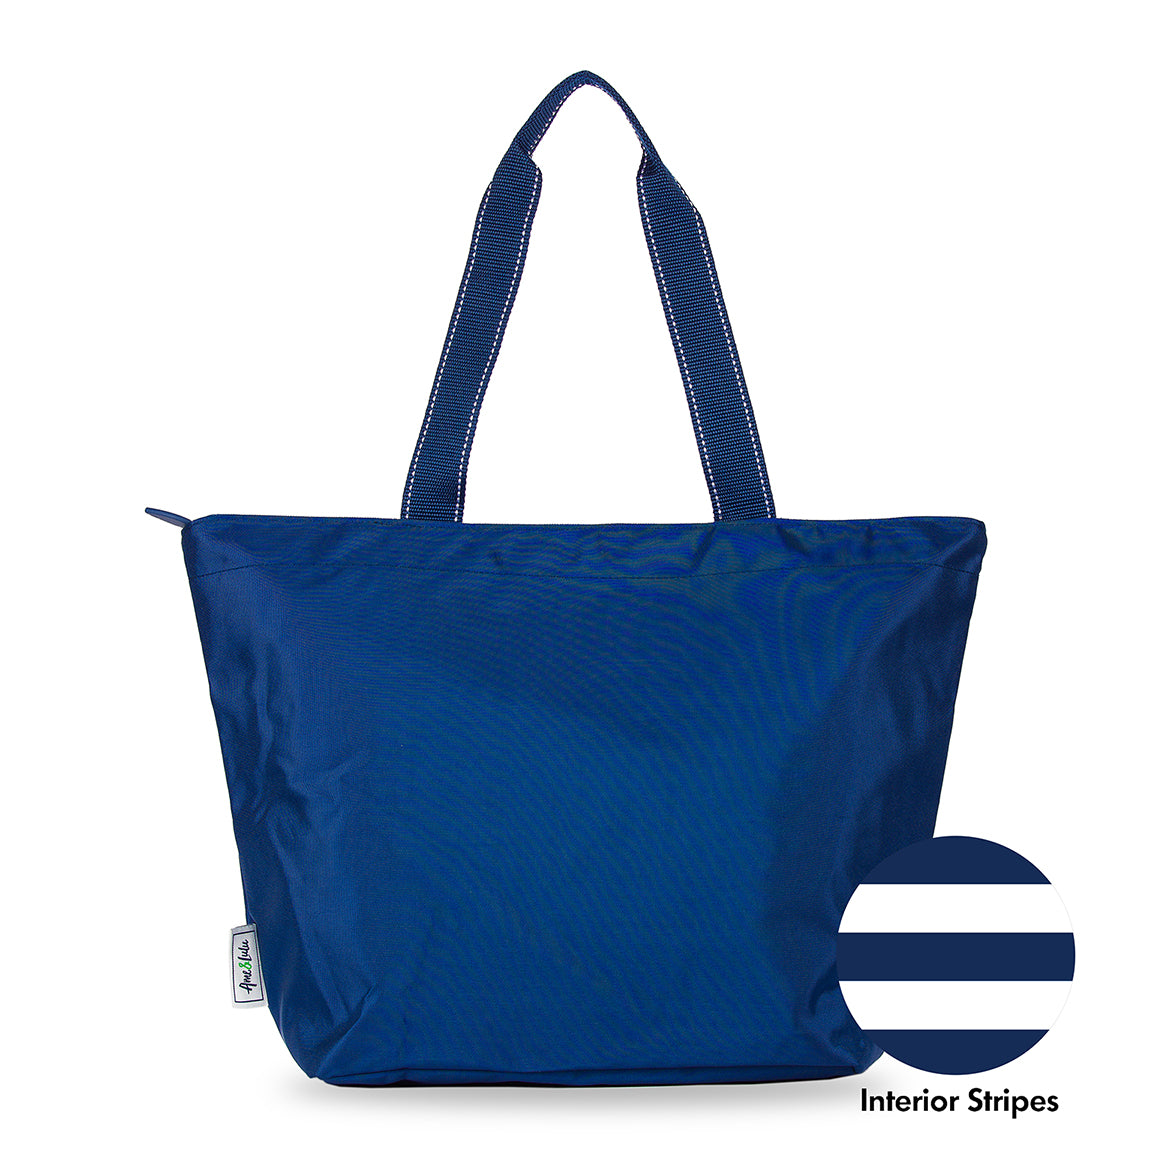 navy nylon tote bag with navy straps with swatch. next to it to show it has navy/white stripe interior